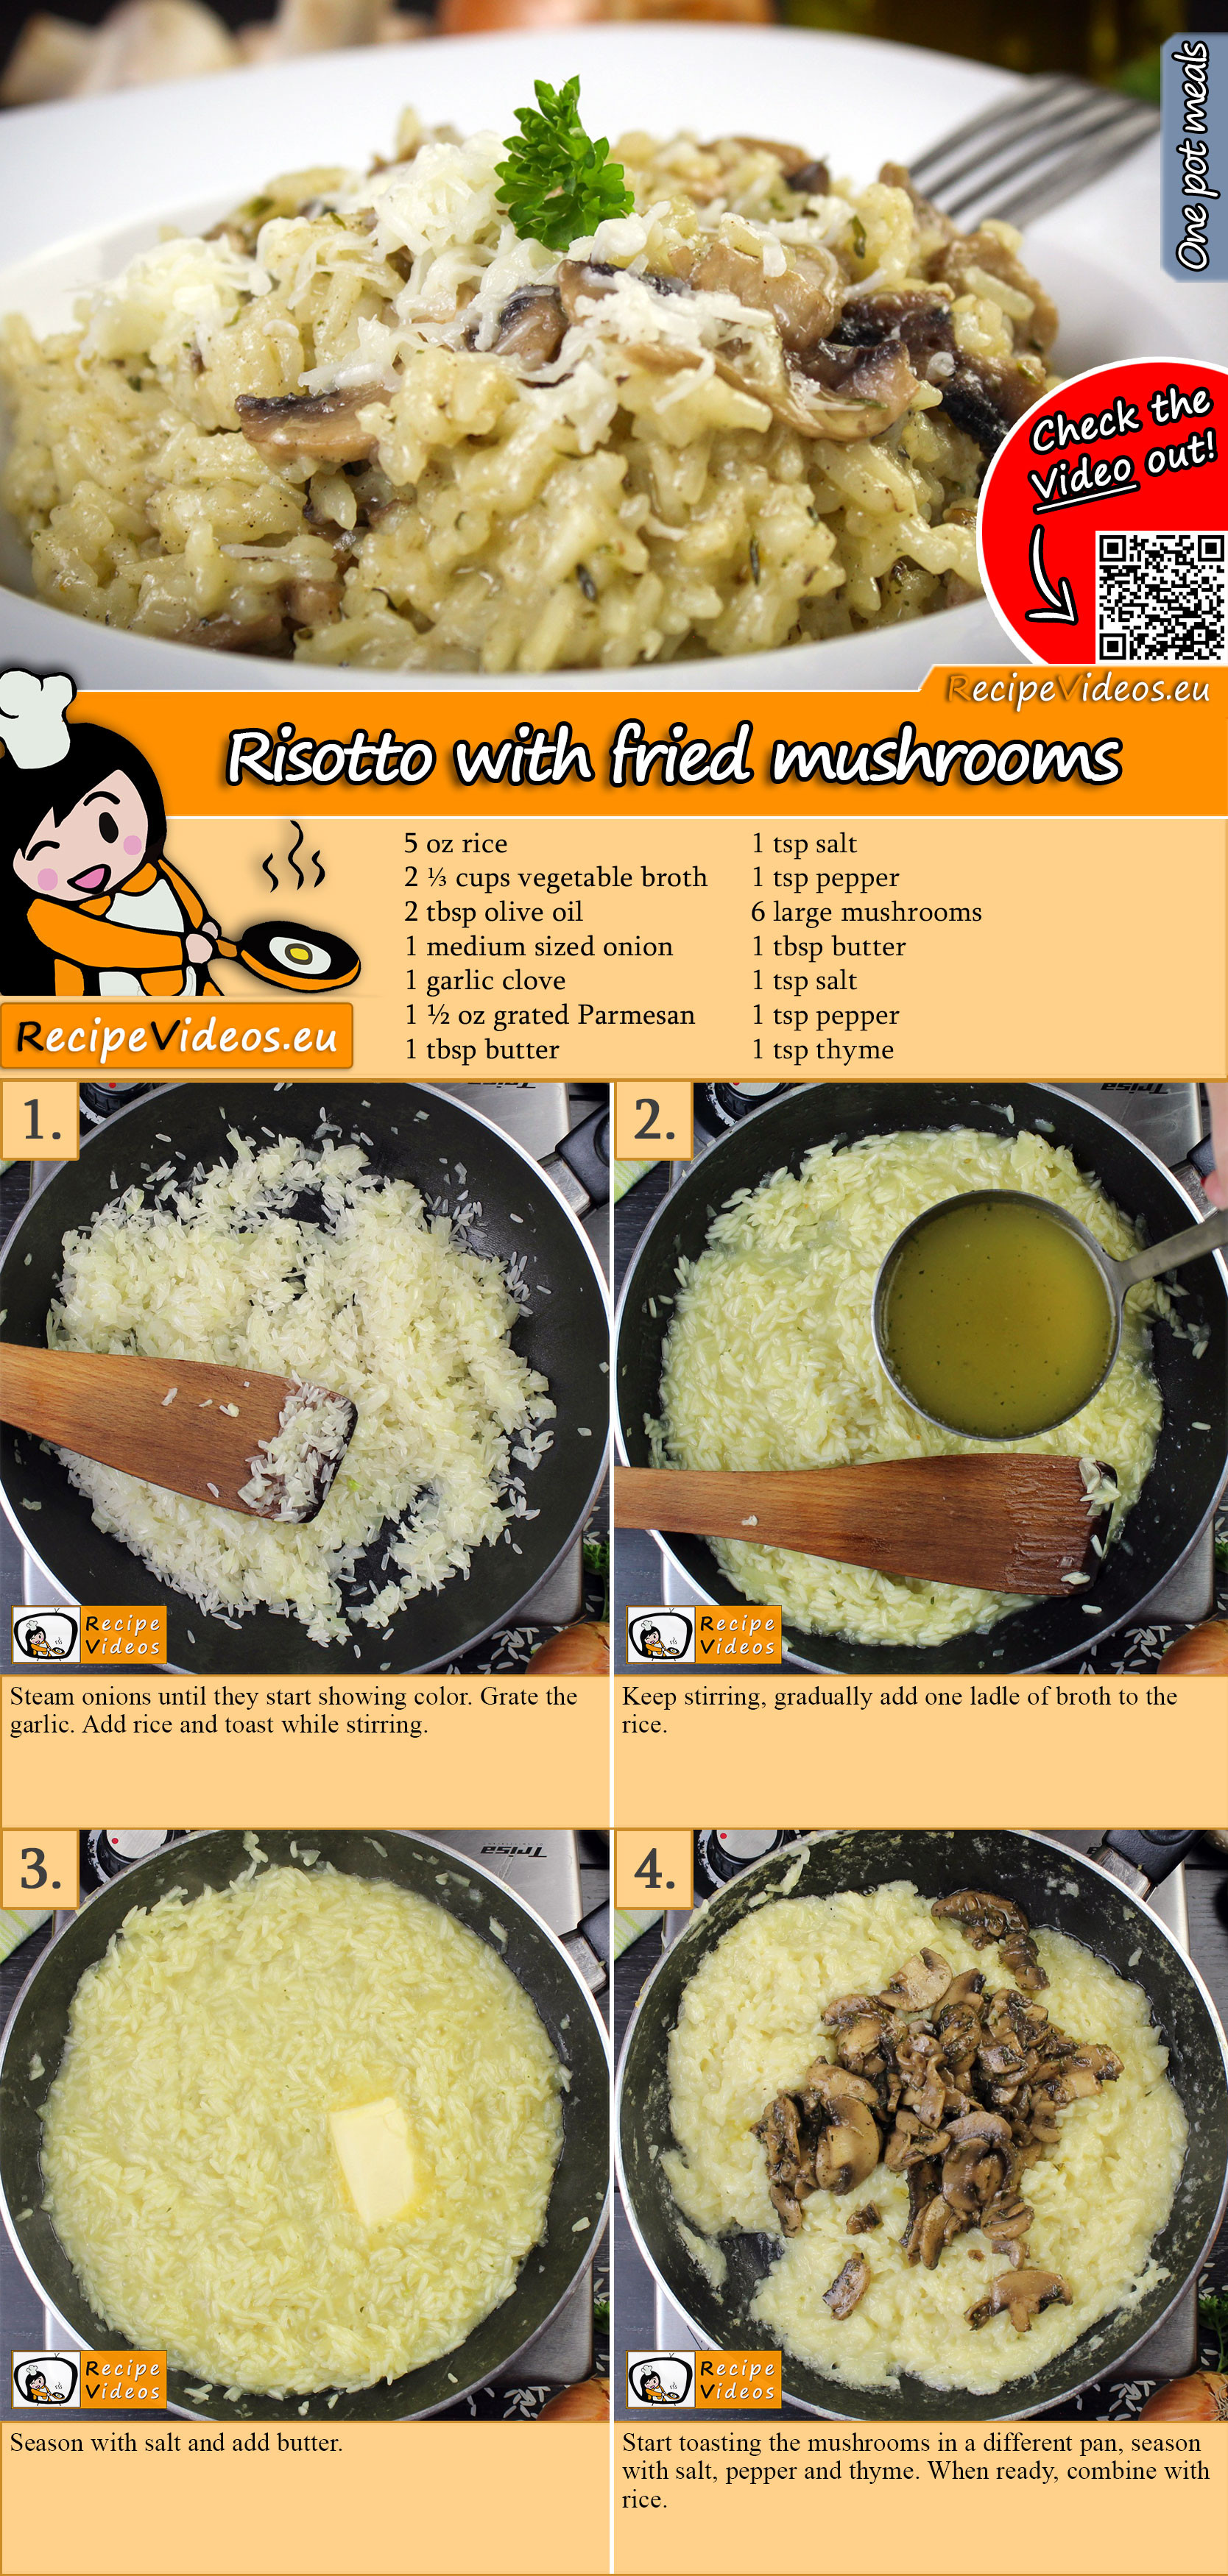 Risotto with fried mushrooms recipe with video